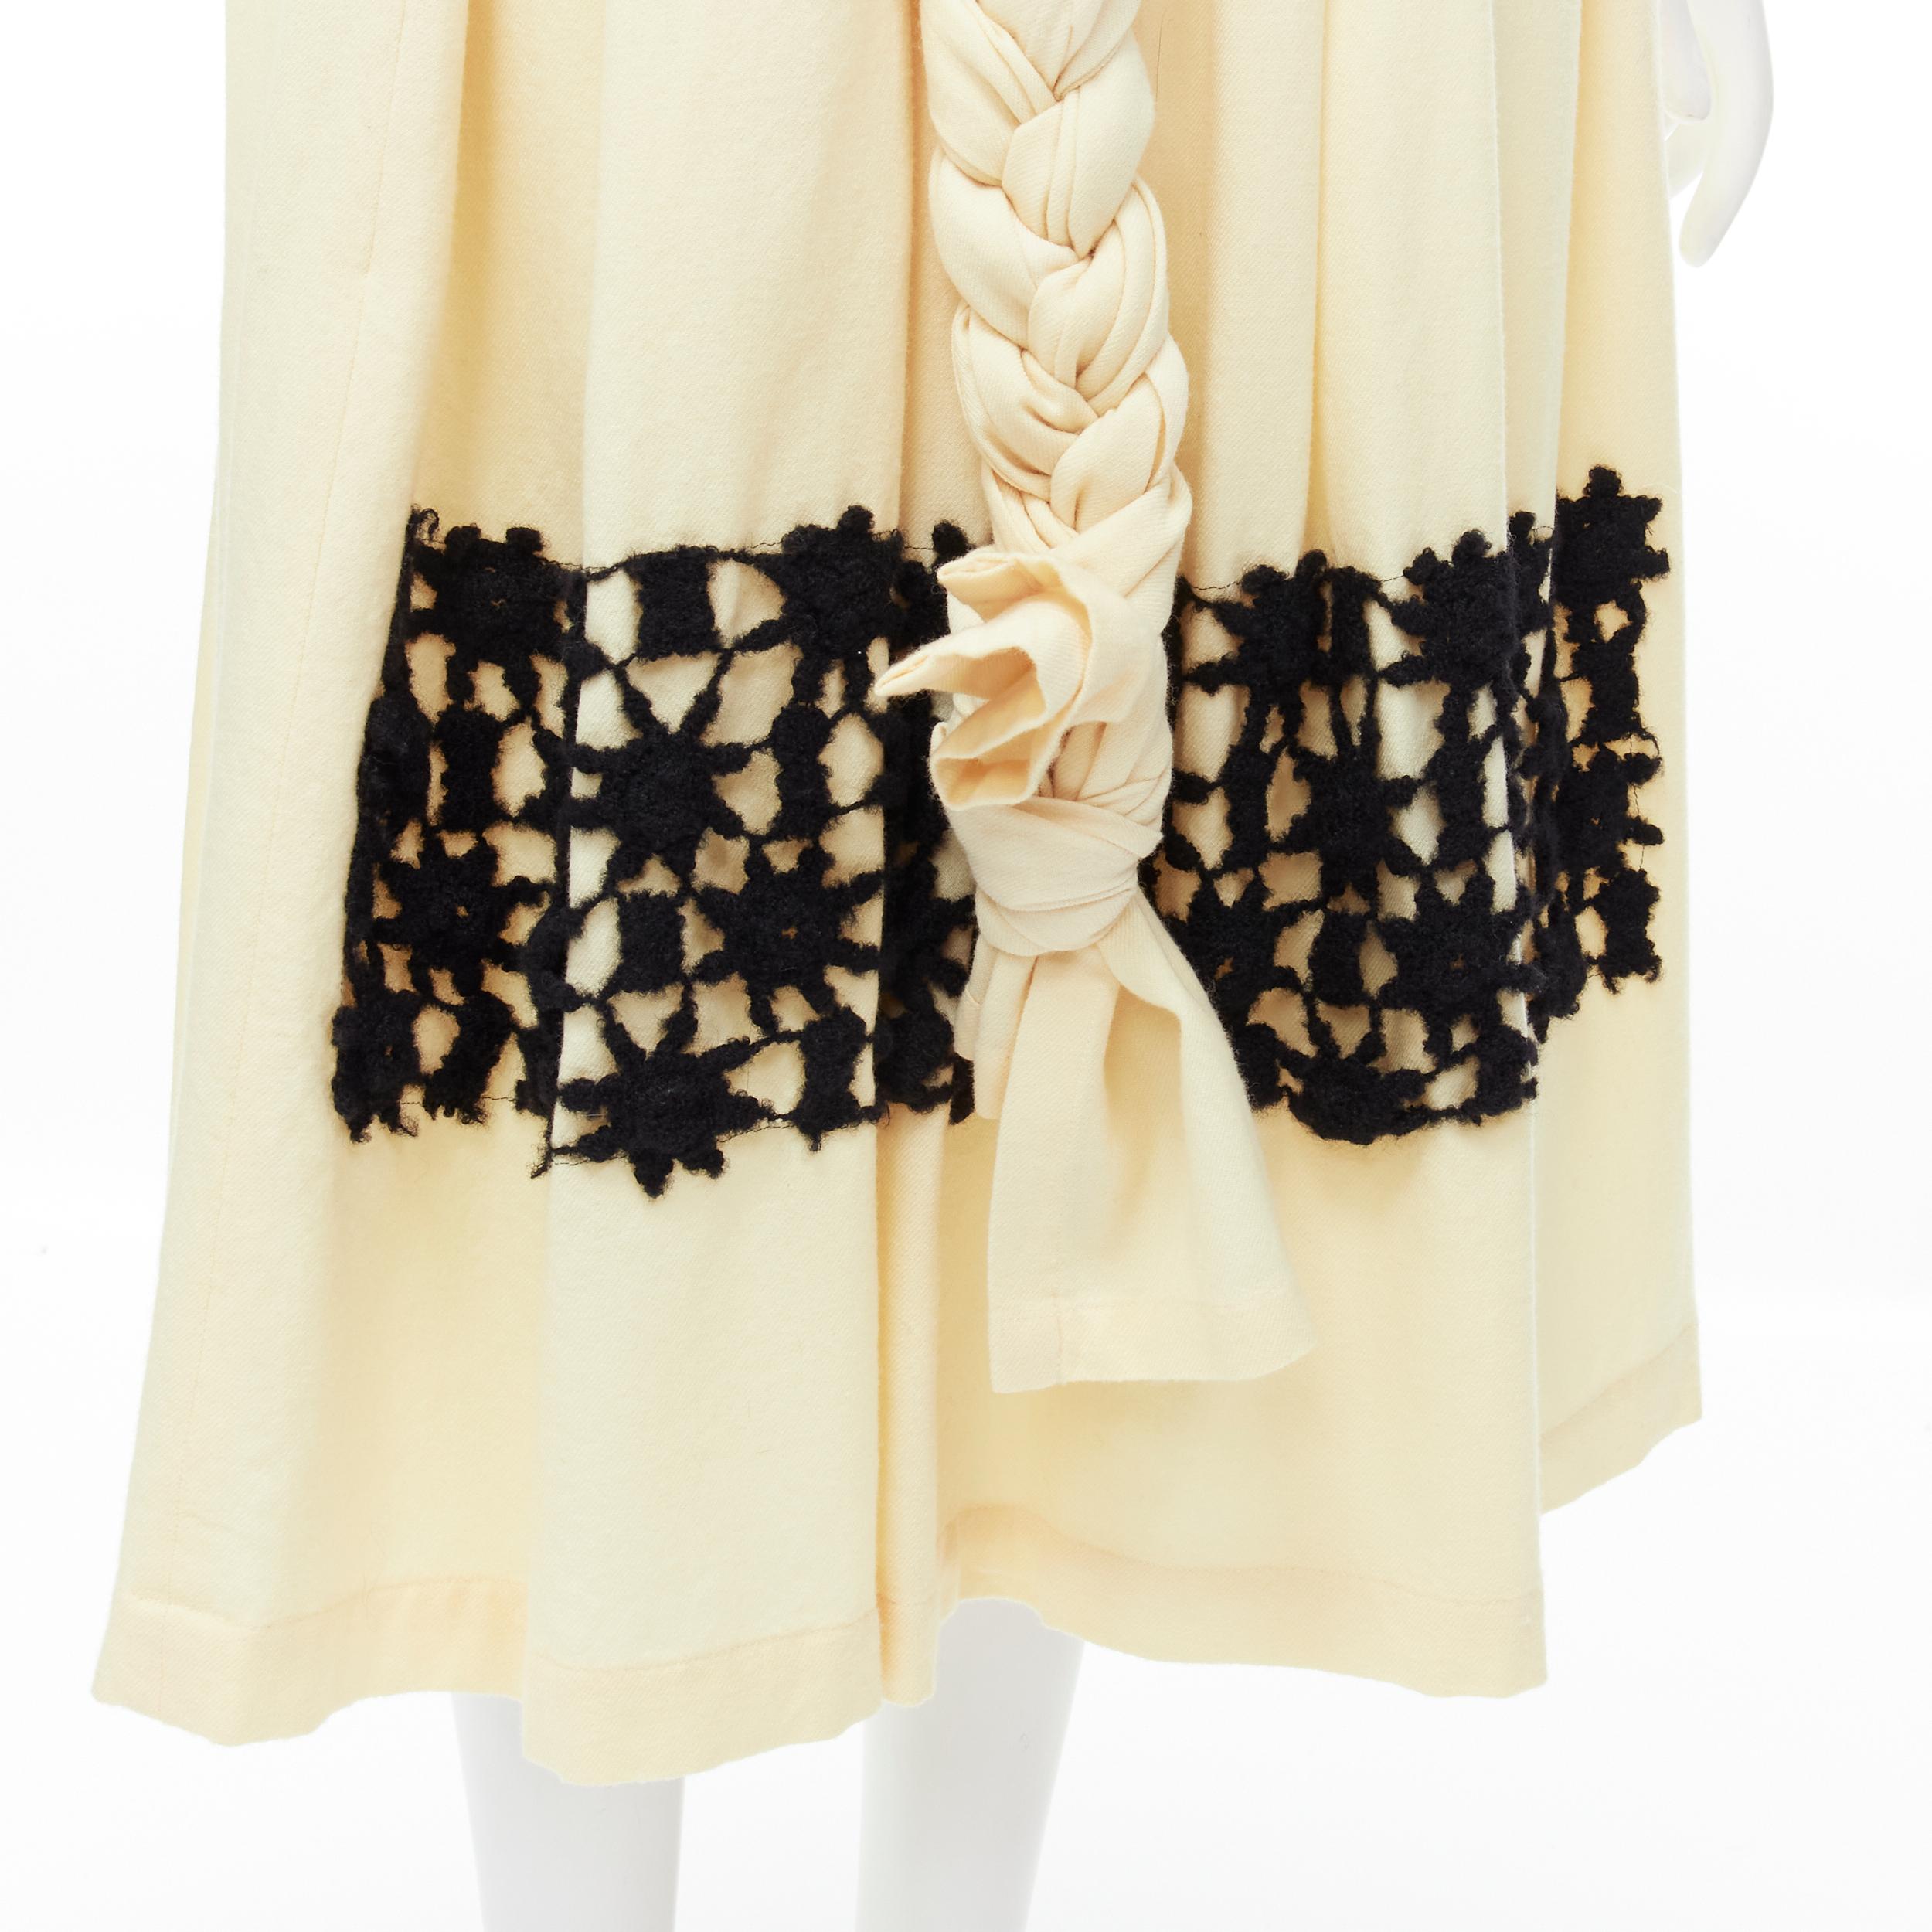 COMME DES GARCONS Vintage 1988 cream wool braid black lattice embroidery skirt M 
Reference: CRTI/A00560 
Brand: Comme Des Garcons 
Designer: Rei Kawakubo 
Collection: 1988 
Material: Wool 
Color: Cream 
Pattern: Solid 
Closure: Embroidery 
Extra